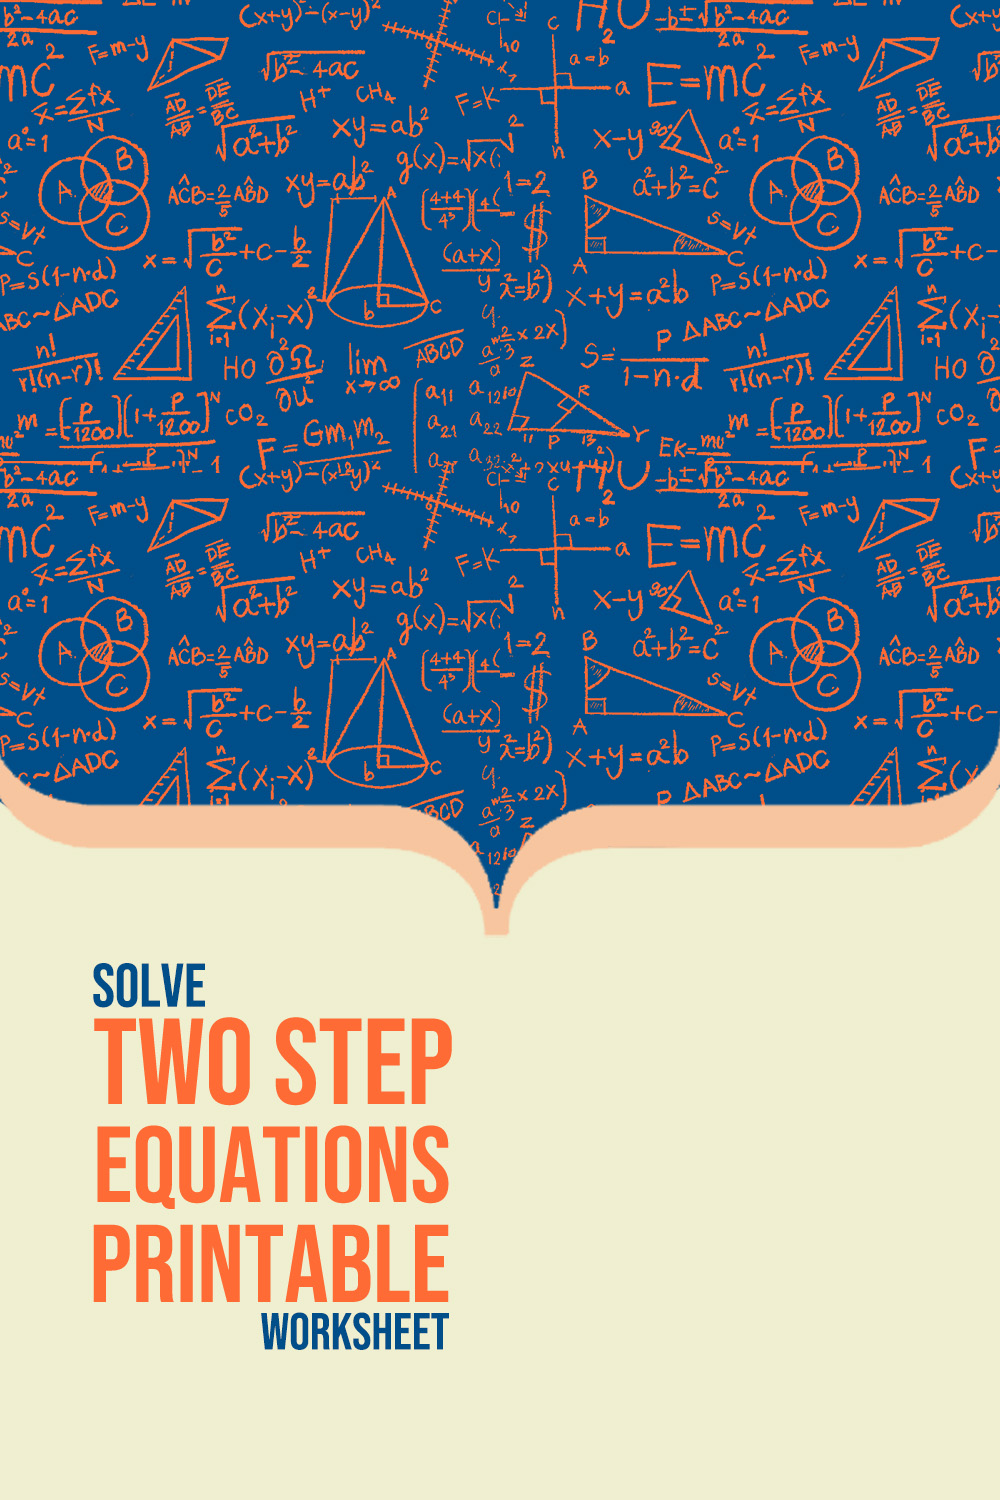 11 Images of Solve Two-Step Equations Printable Worksheet